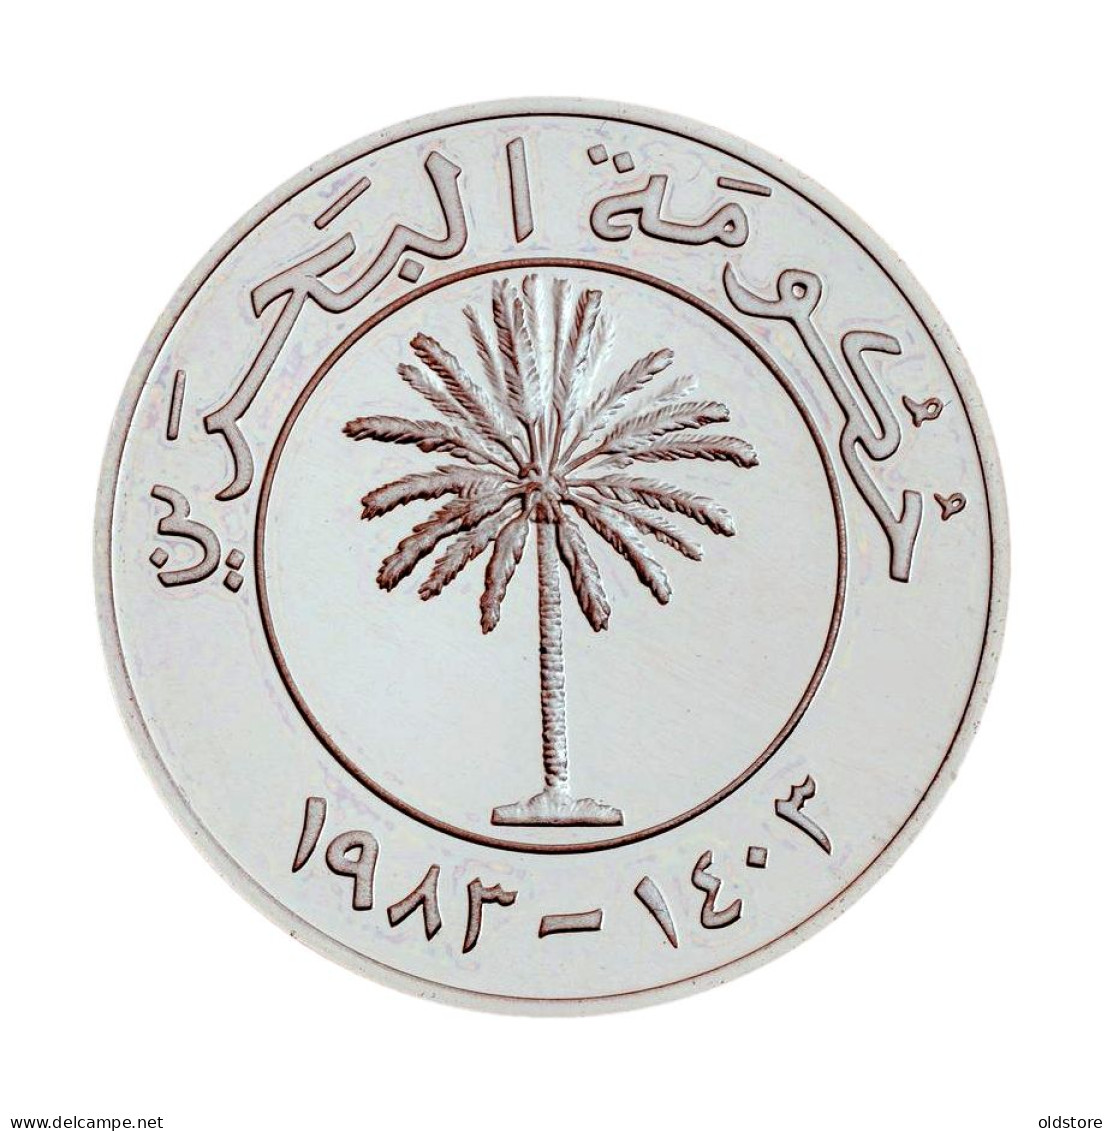 Bahrain Coins - MINT (10 Fils ) Proof  -  Sterling Silver - ND 1983 - Mint Silver Coins - Bahrain